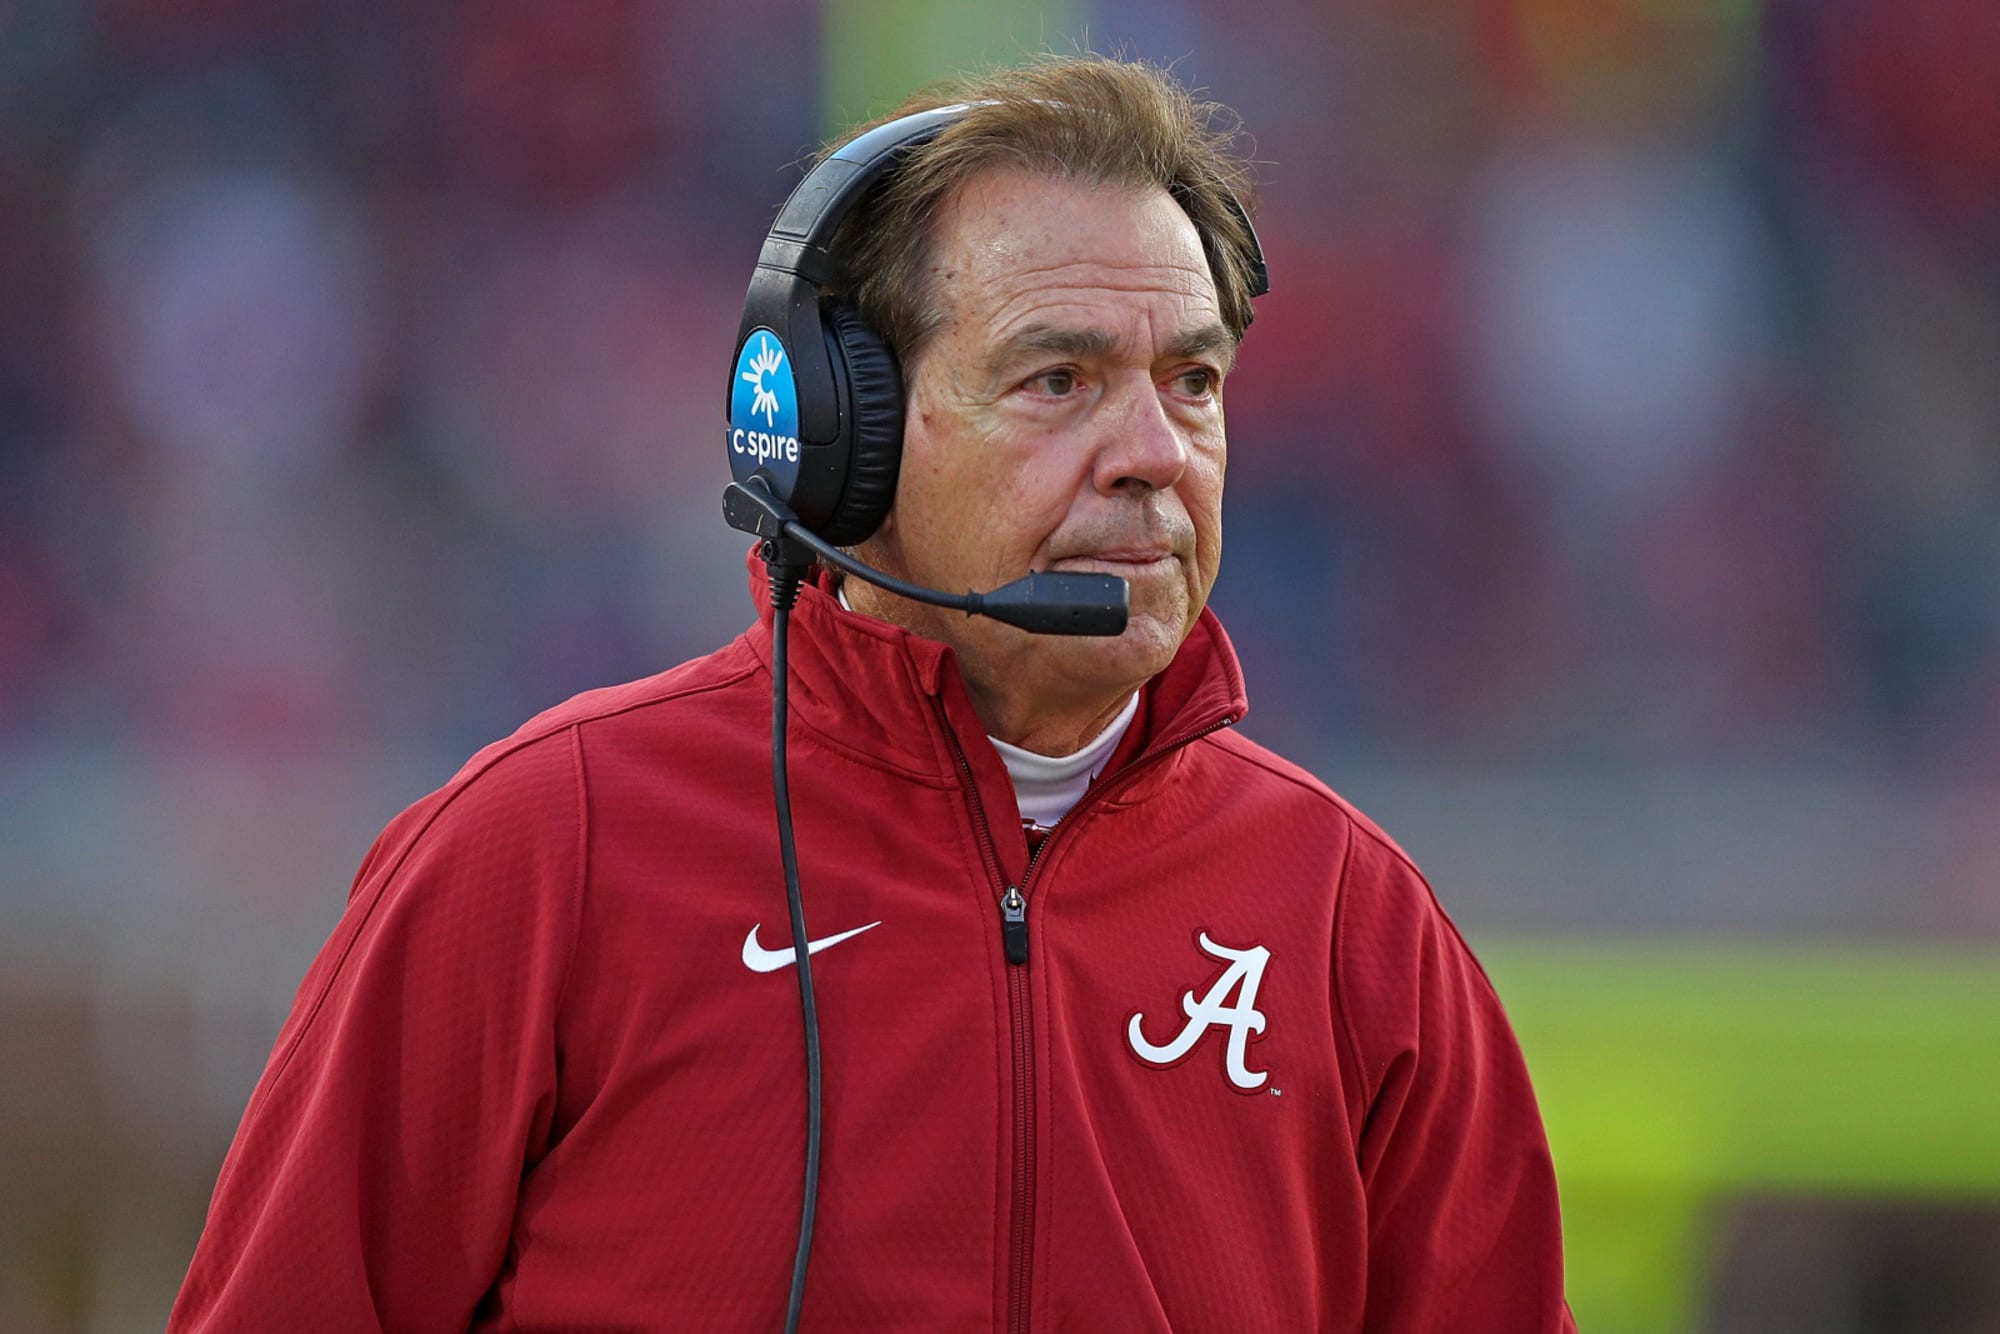 Alabama Football: With O’Brien to Pats a new OC soon